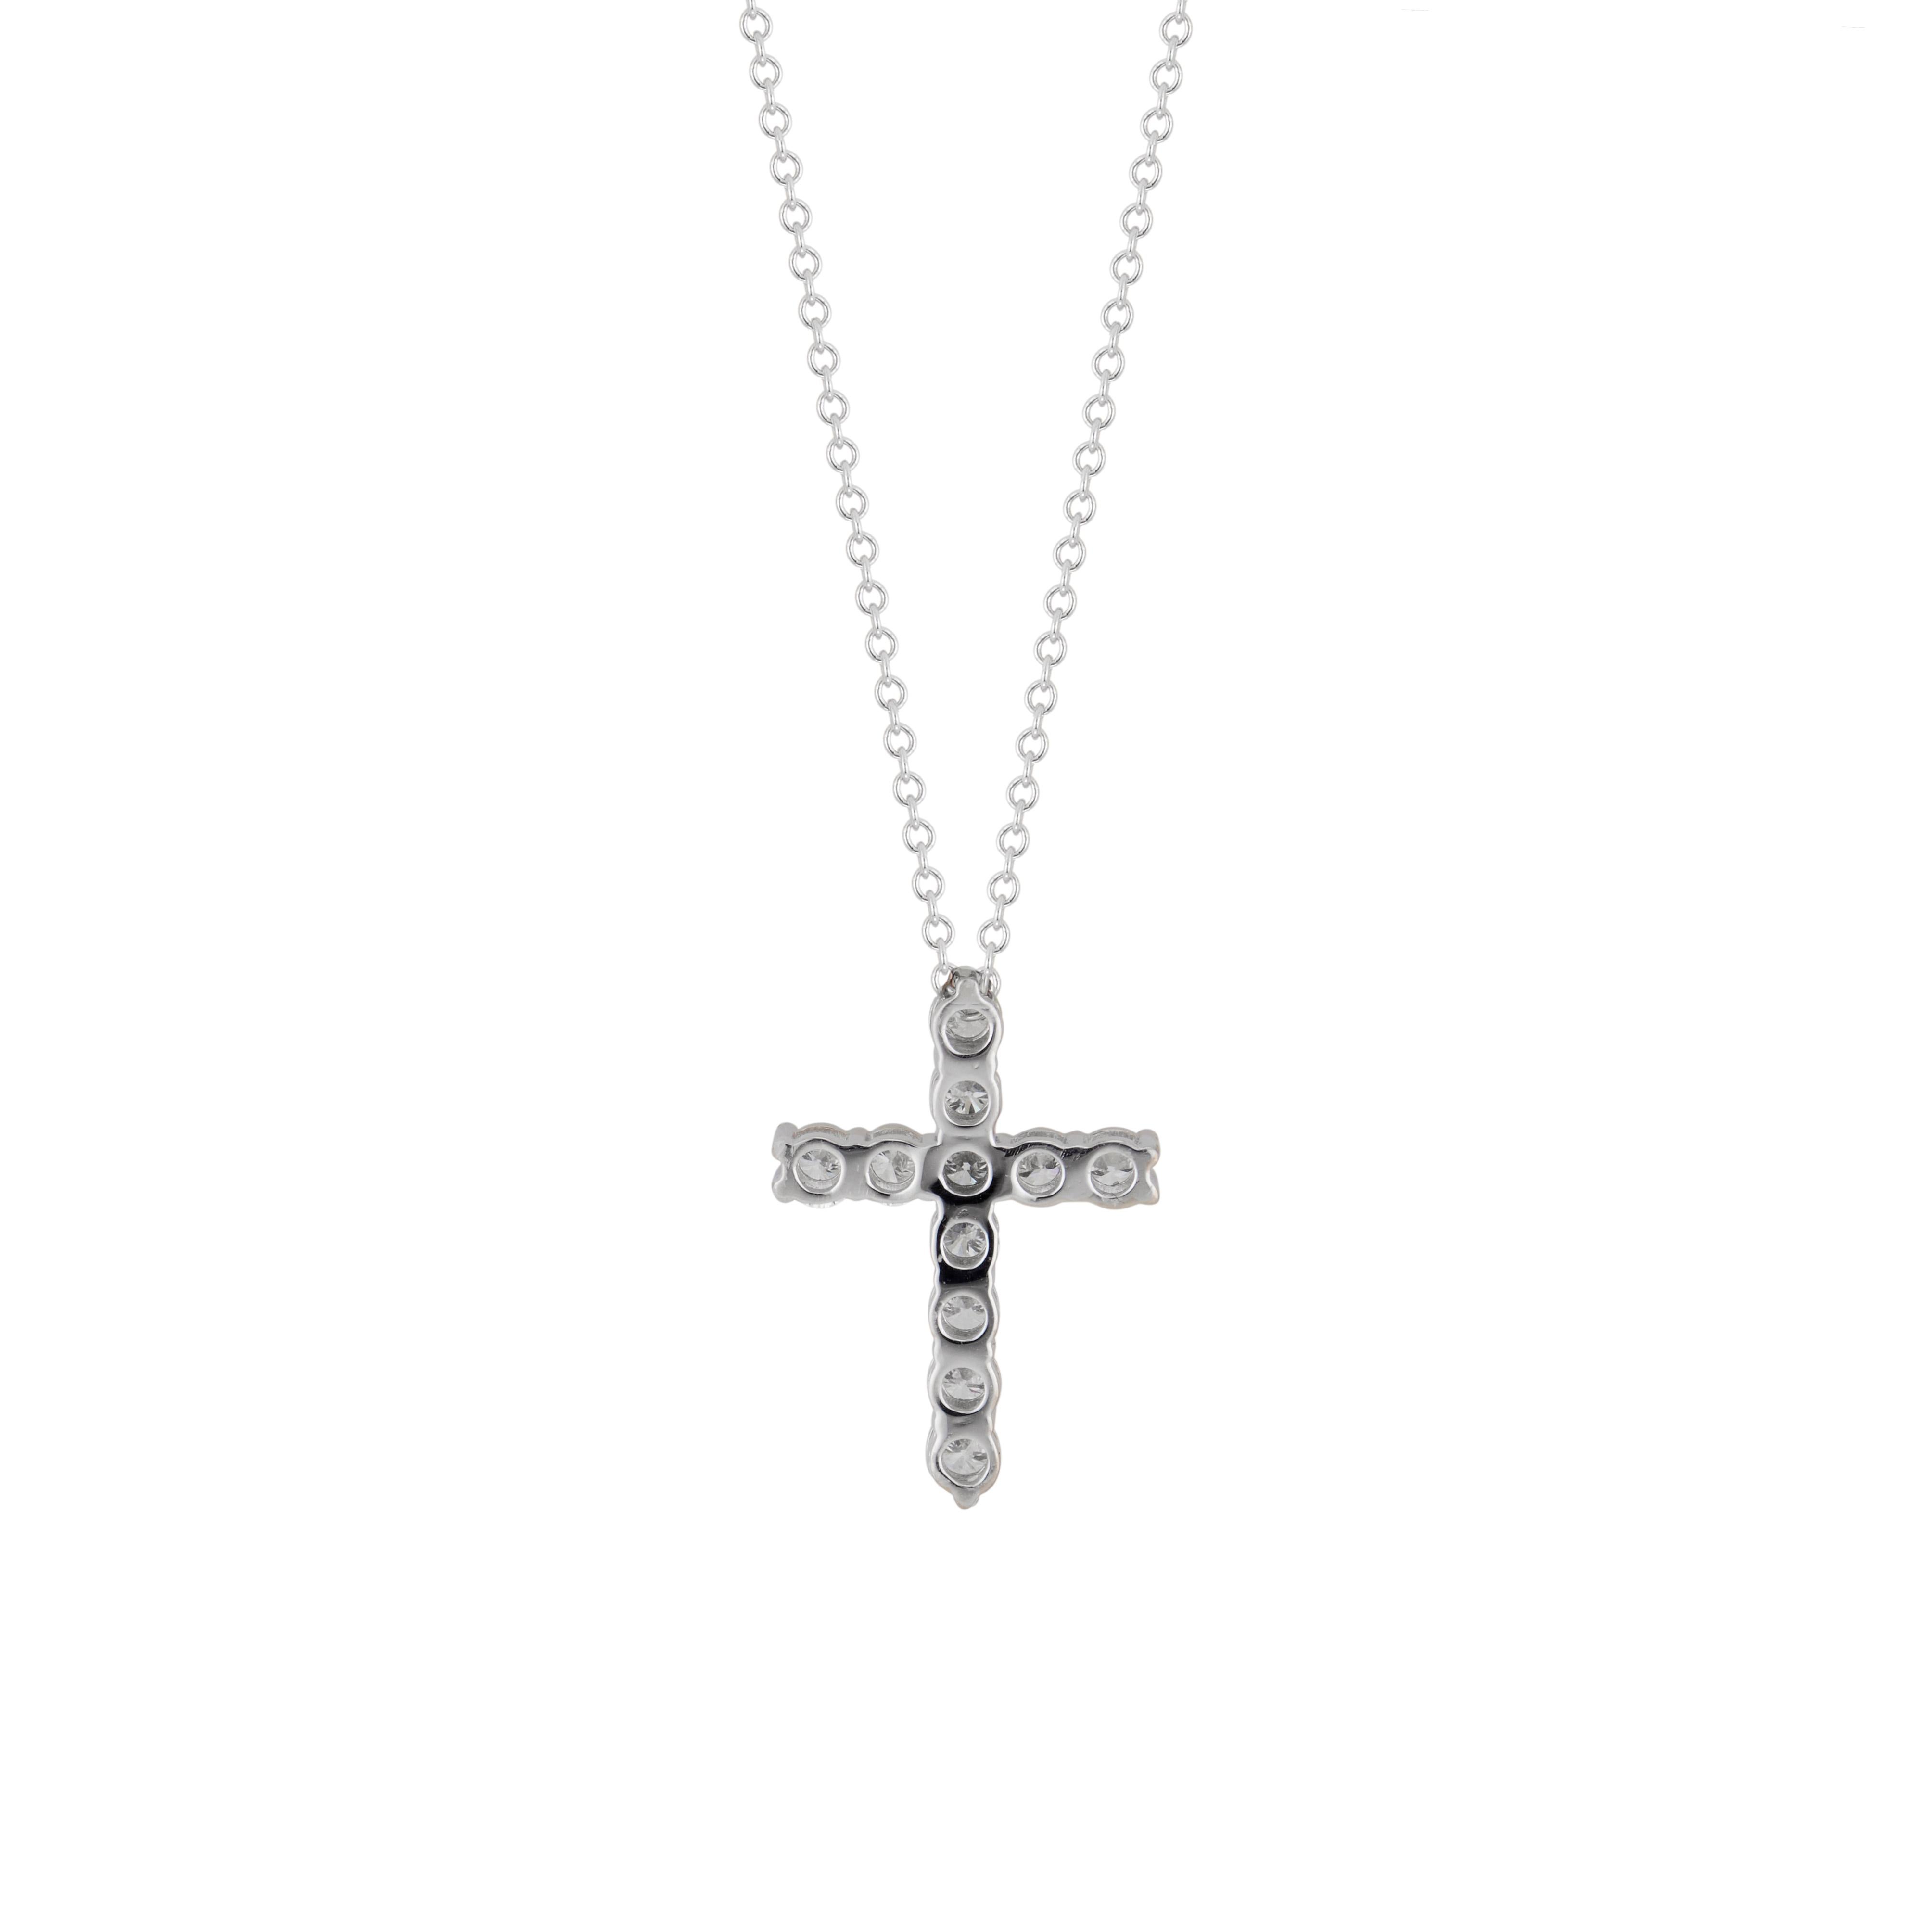 Diamond  classic common prong cross in platinum with 11 round brilliant cut diamonds. 18 inch chain. Designed and crafted in the Peter Suchy workshop. 

11 round brilliant cut diamonds, F VS approx. .53cts
Platinum 
Stamped: 950
4.4 grams
Top to